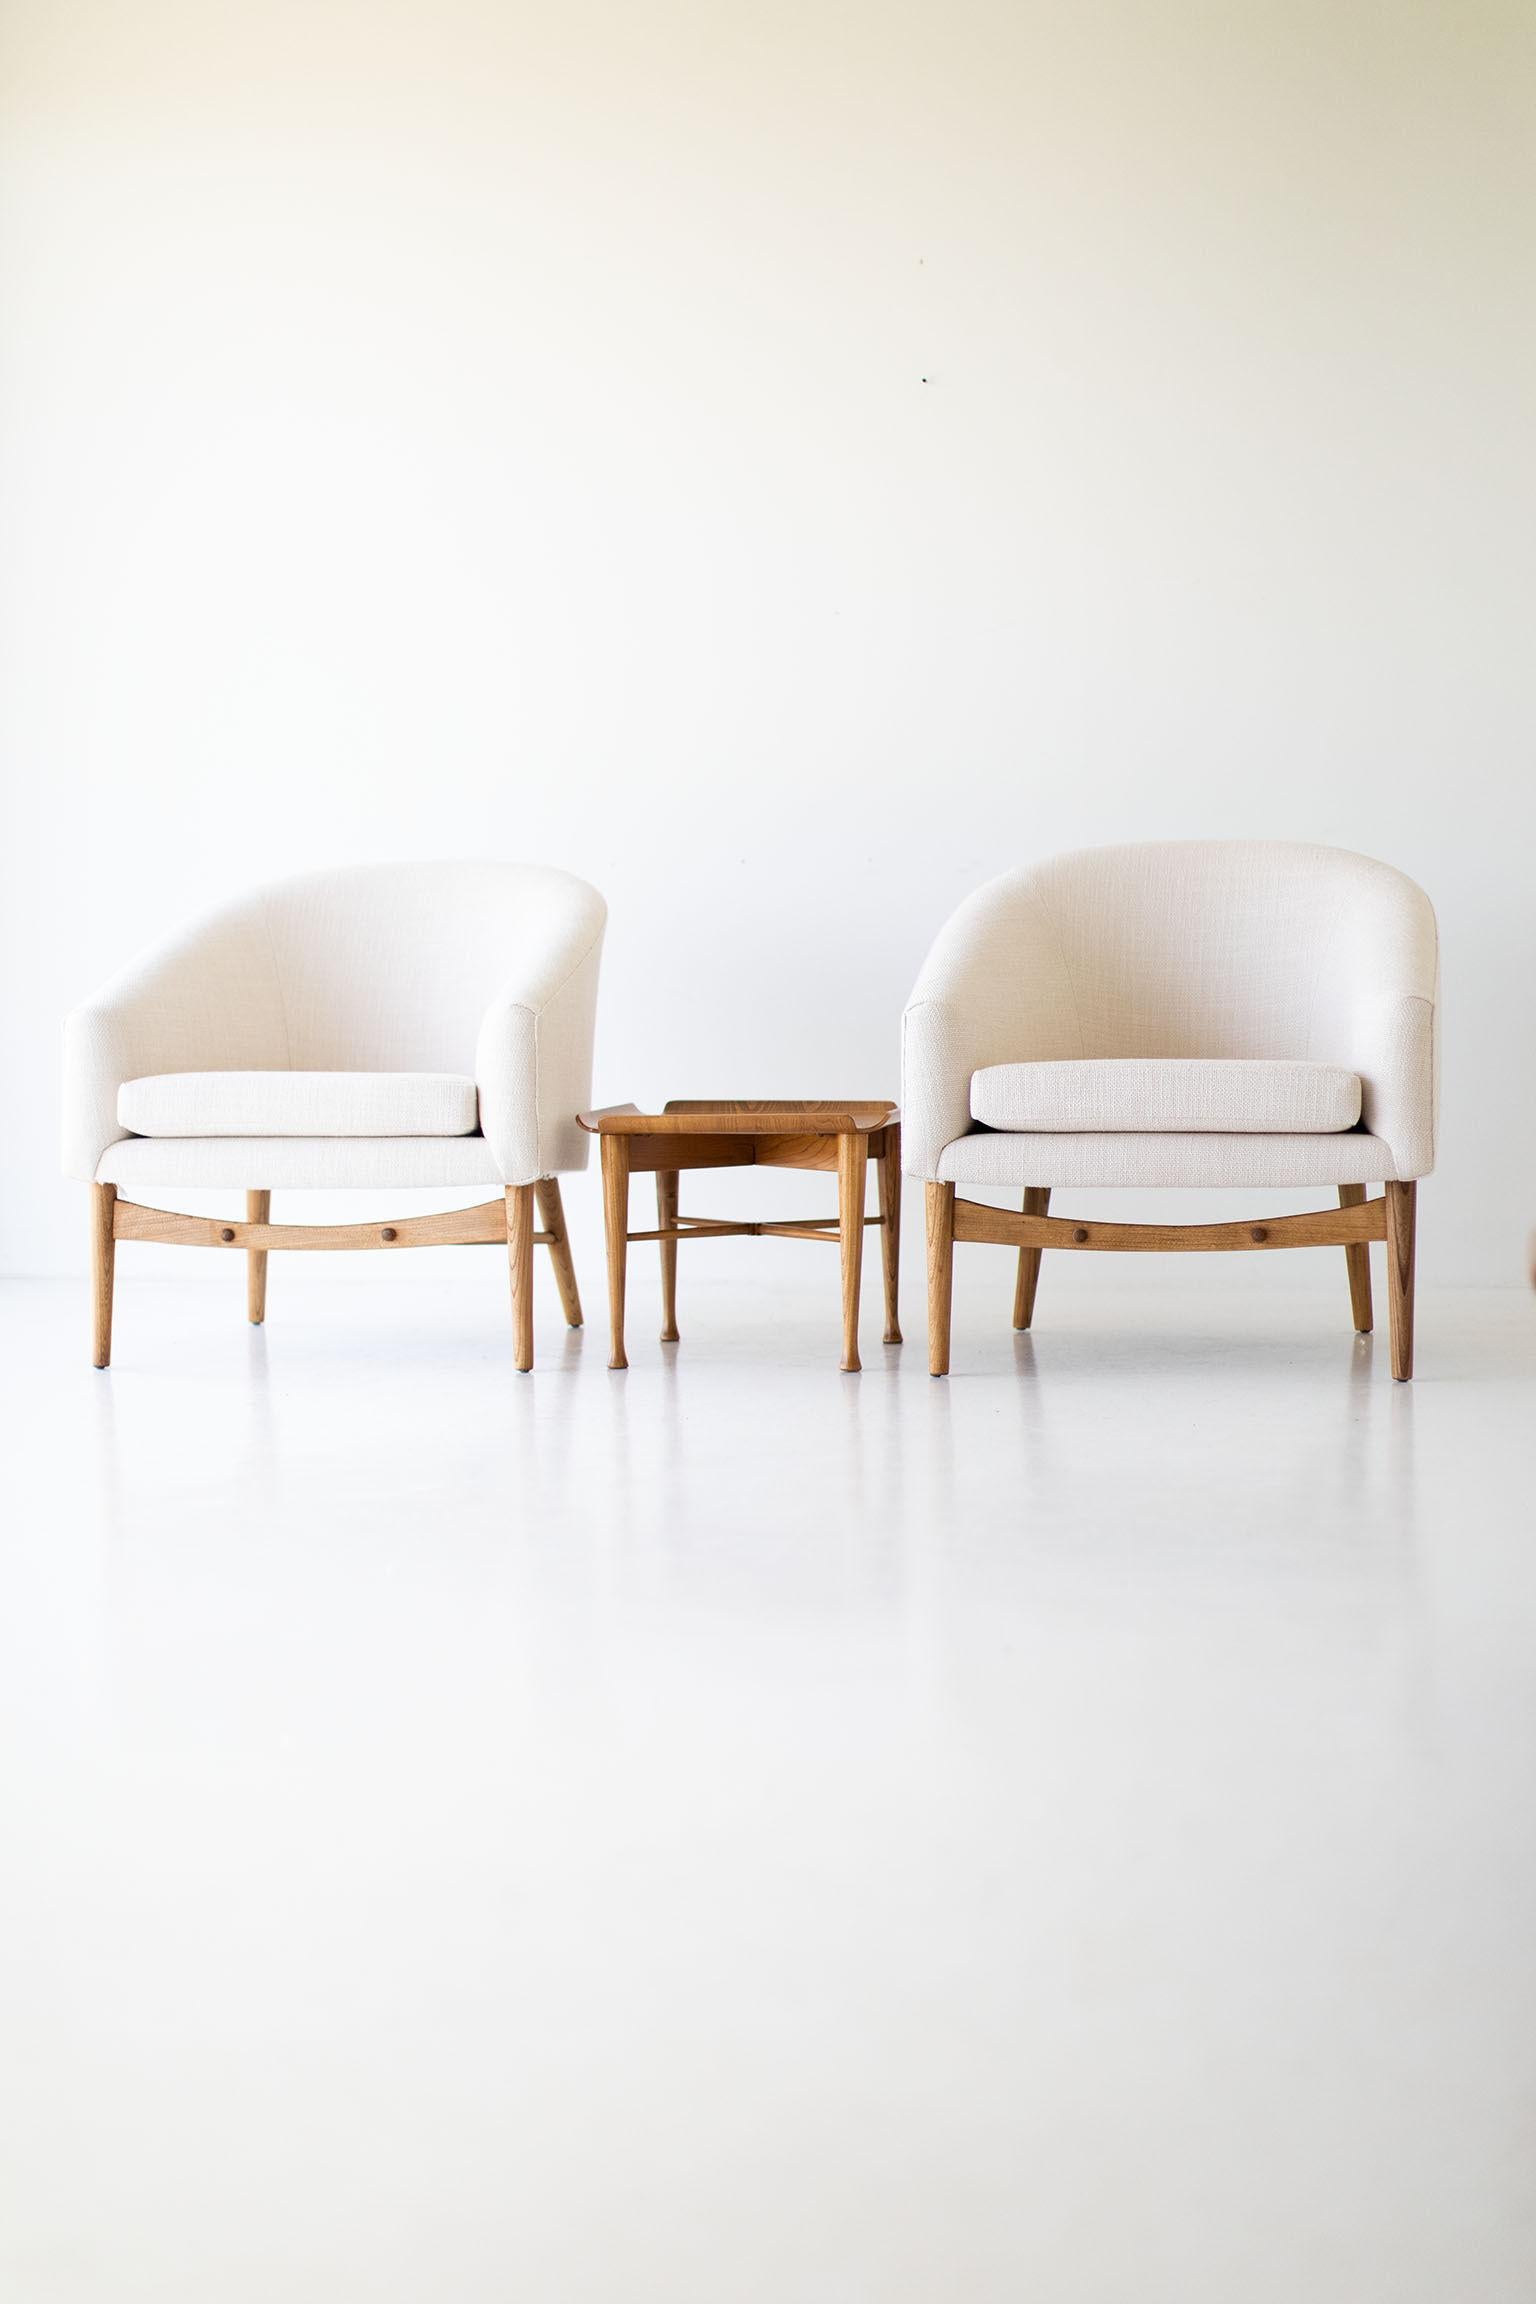 Mid-20th Century Lawrence Peabody Side Tables for Richardson Nemschoff